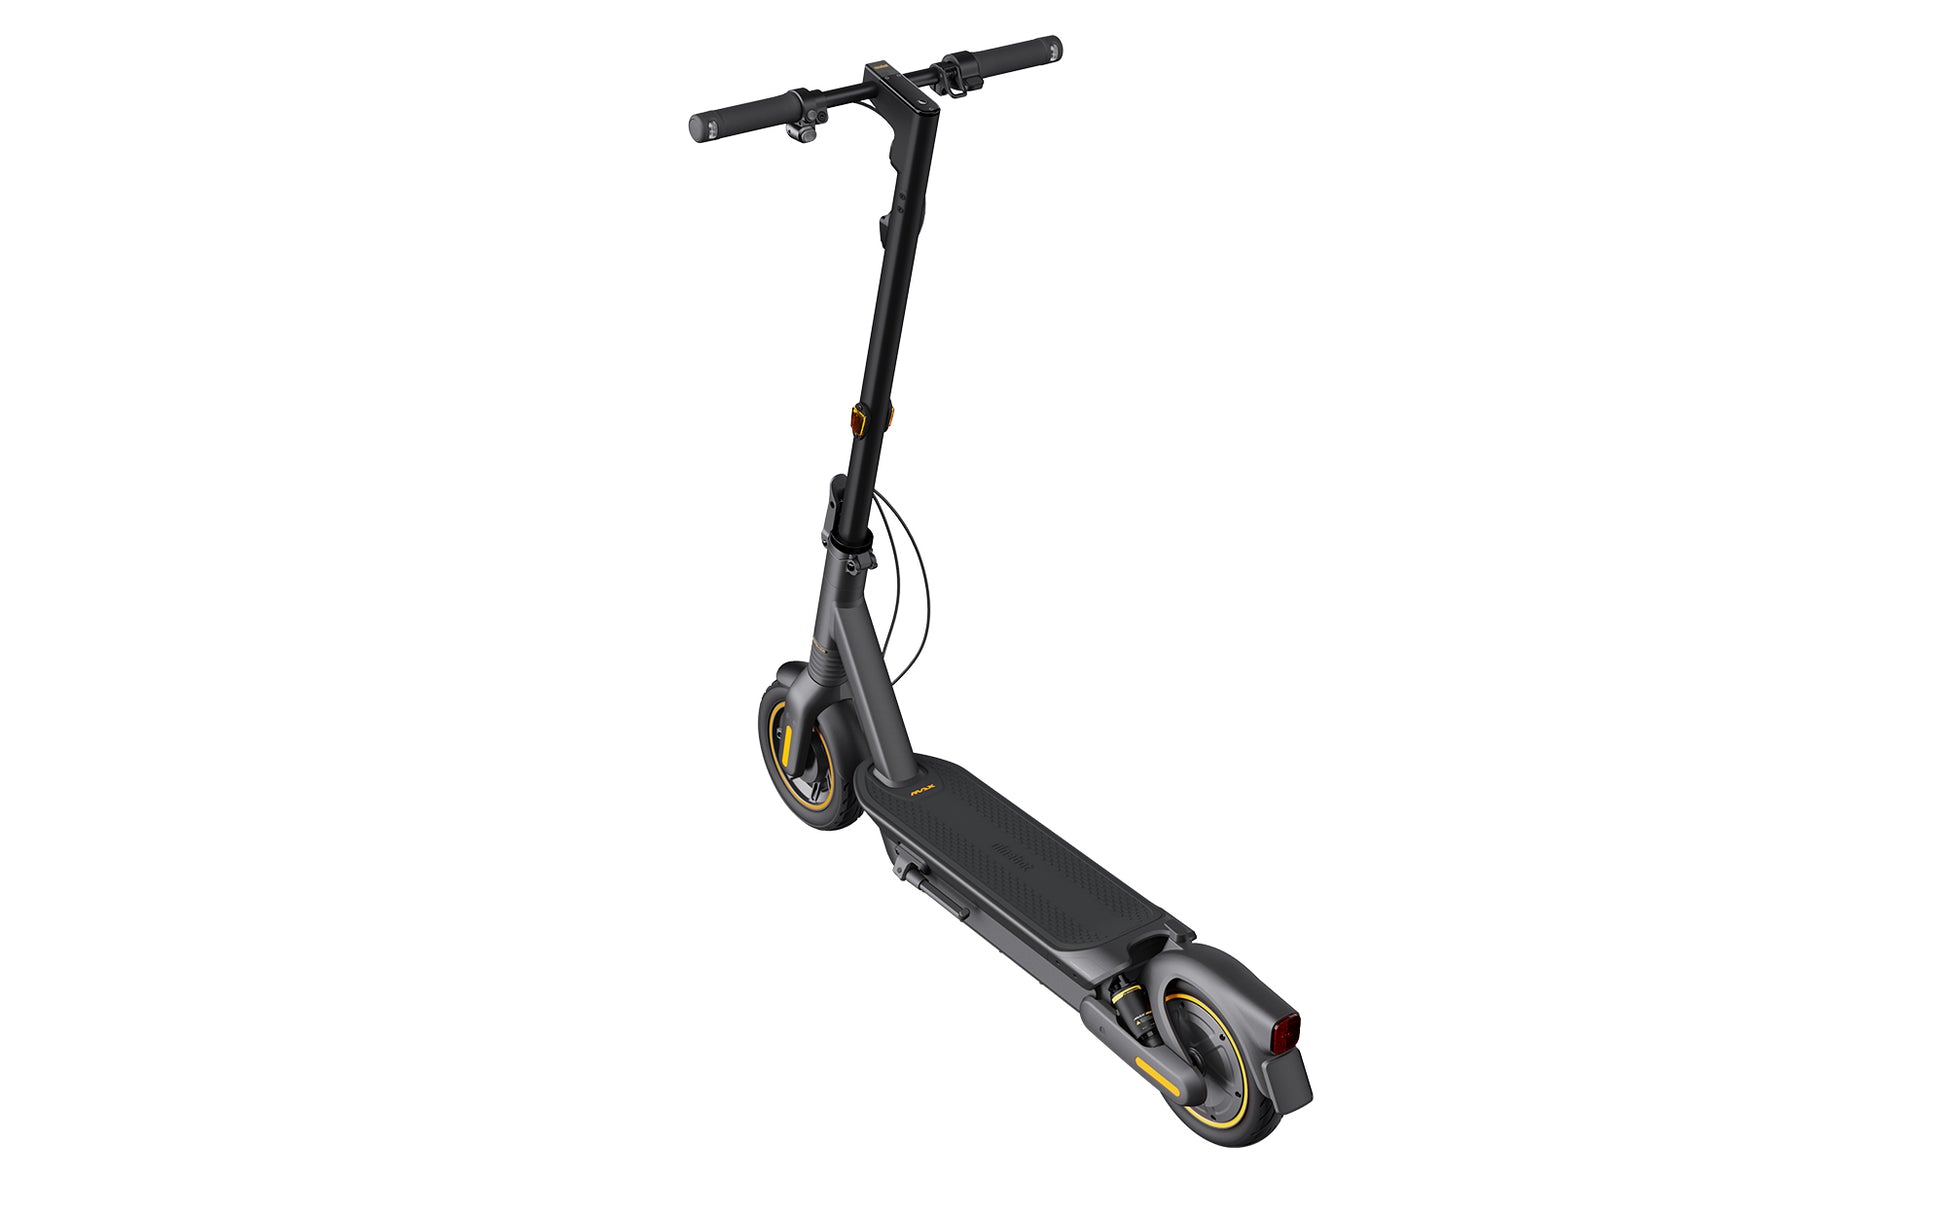 Ninebot By Segway Max G2 Smart Wolf King Gt Scooter 35km/H Speed, 70Km  Range, 1000W Motor, EU Stock, APP Included From Sumtop2019eur, $667.64